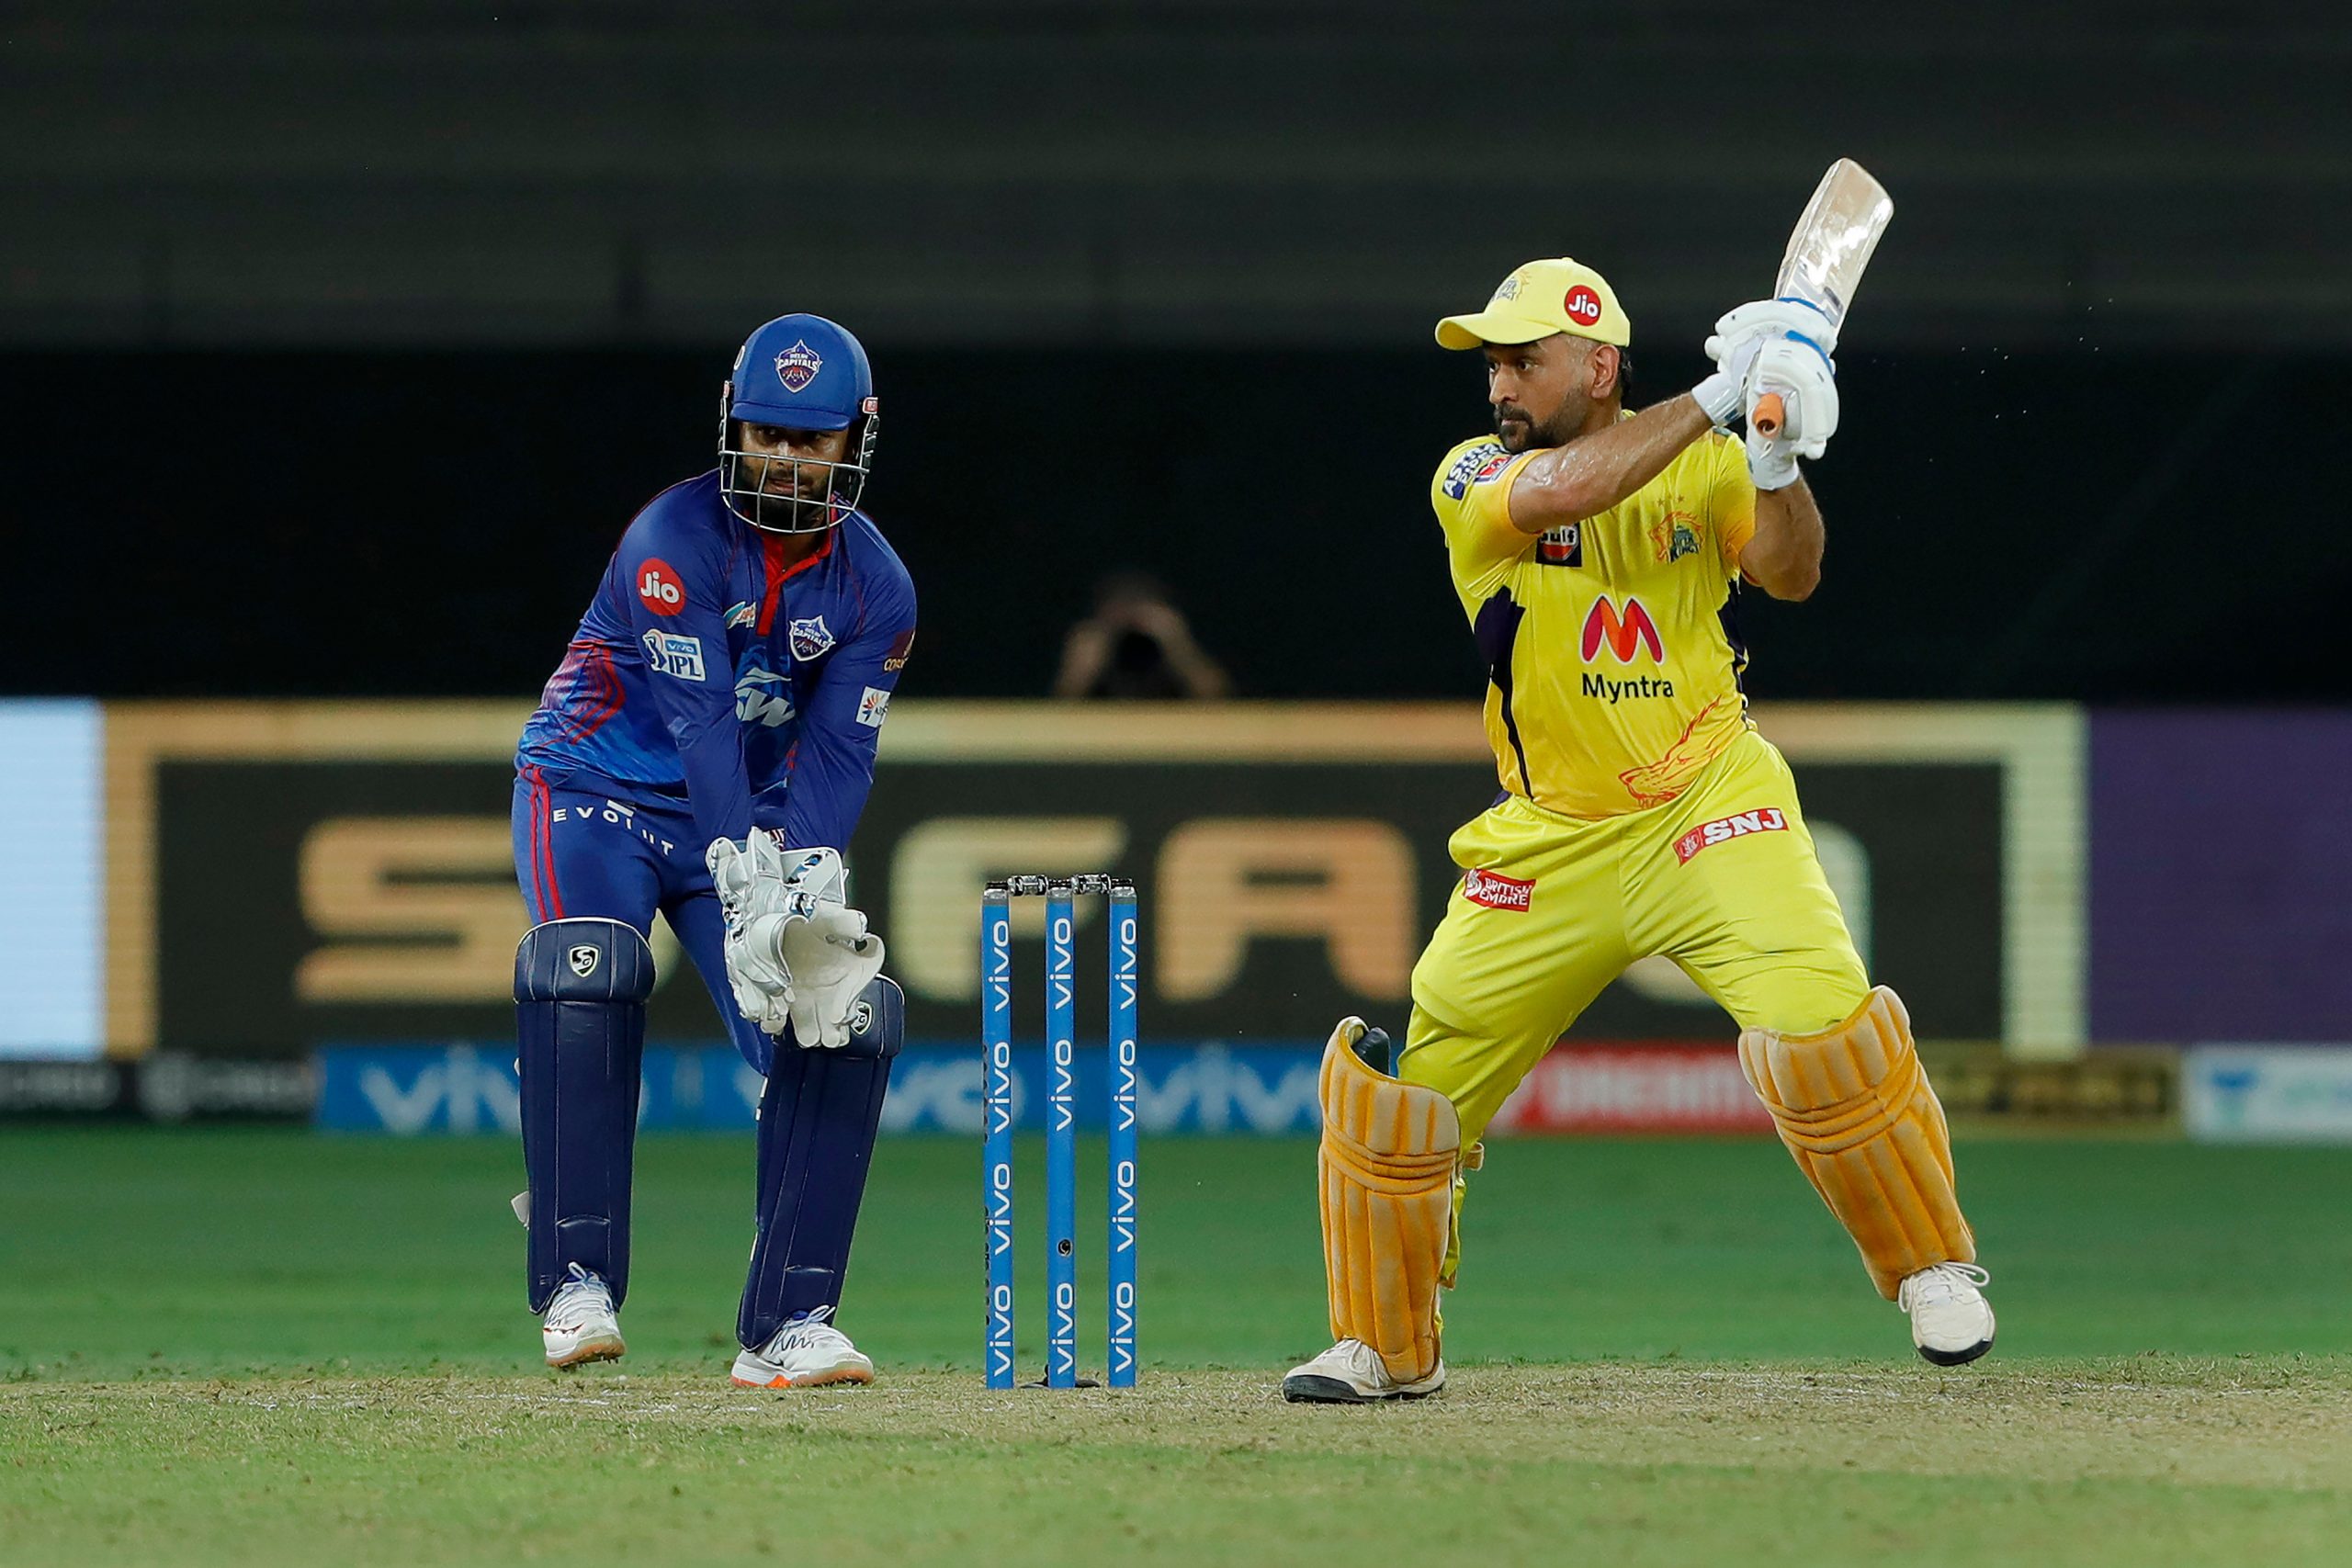 Virender Sehwag wants Chennai Super Kings to retain MS Dhoni in IPL 2022